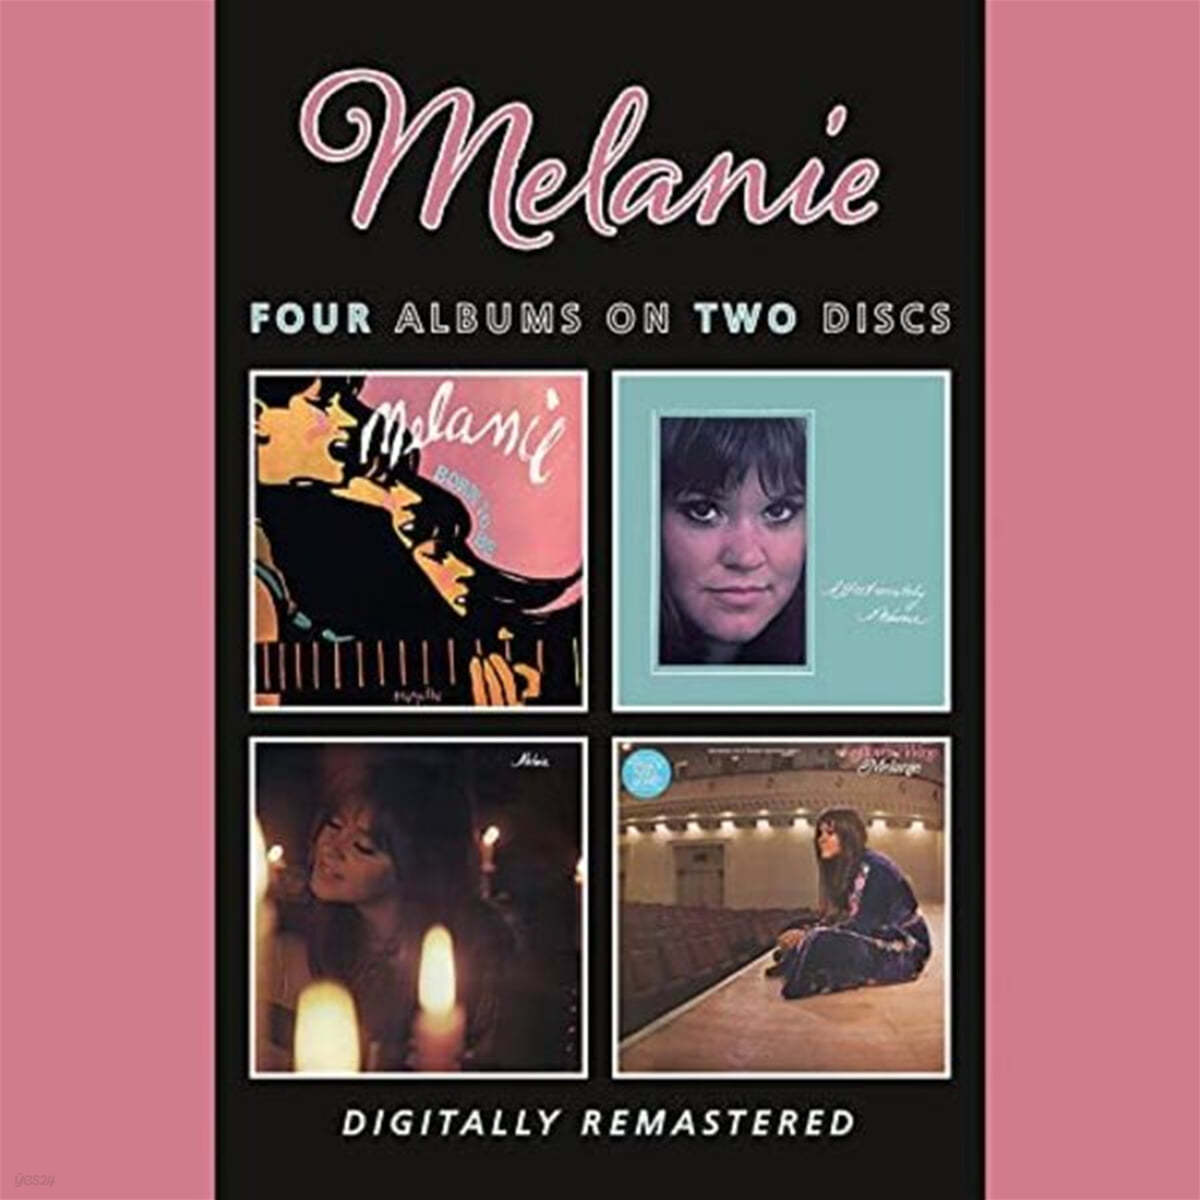 Melanie (멜라니) - Born To Be / Affectionately Melanie / Candles In The Rain / Leftover Wine 